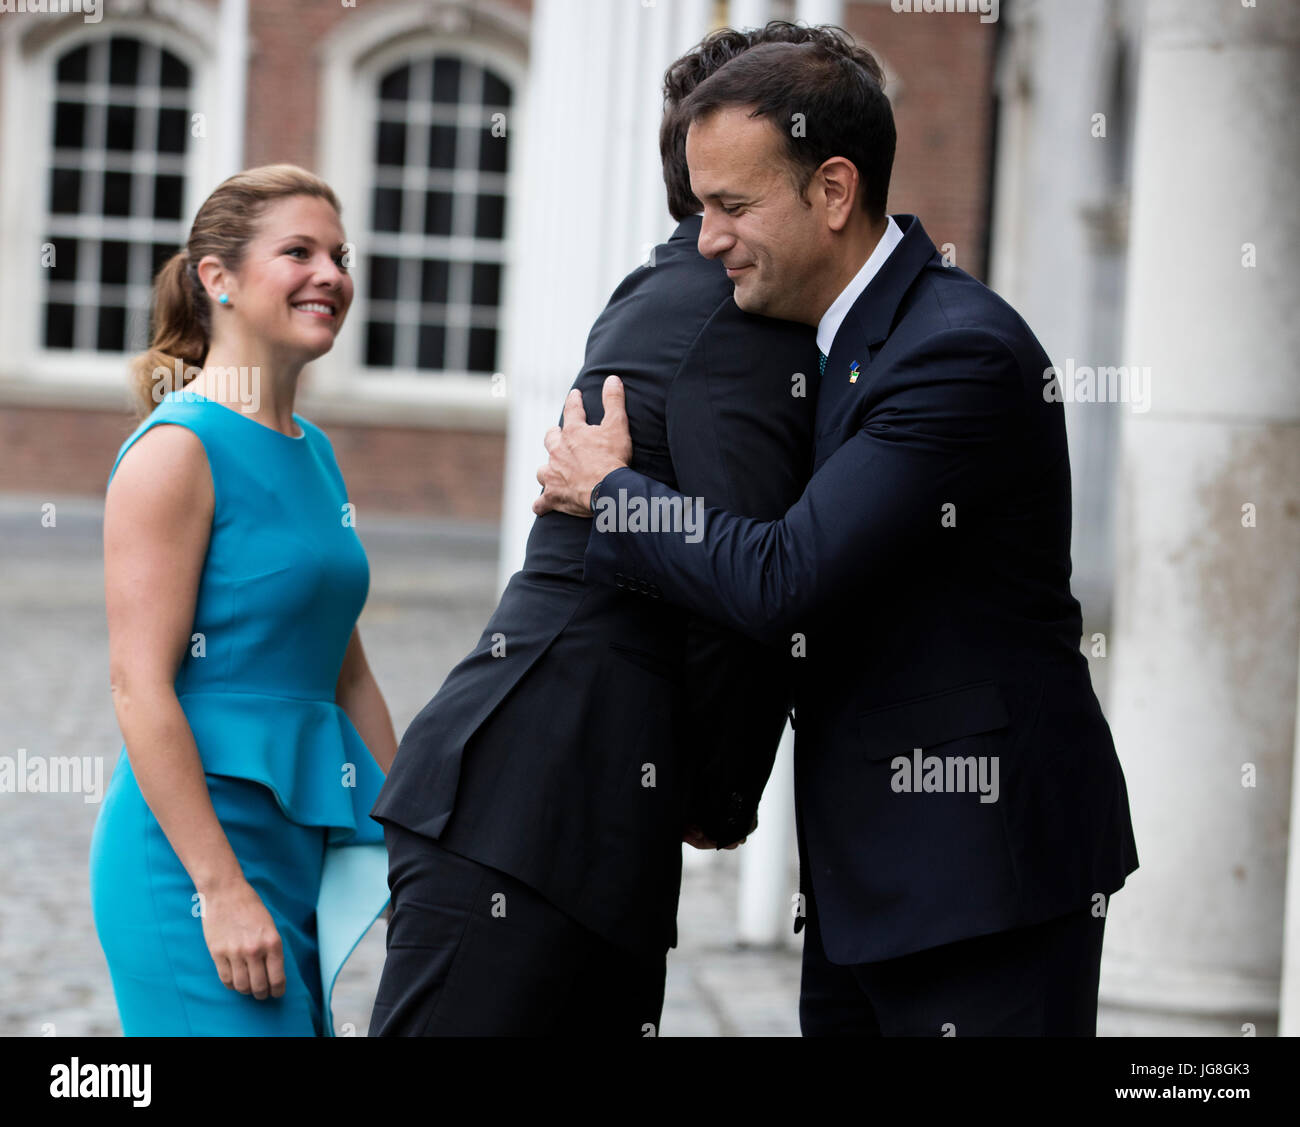 Dublin, Ireland. 4trh Jul, 2017. Canadian Prime Minister Justin Trudeau and his wife Sophie Gregoire Trudeau are greeted by An Taoiseach (Prime Minister) Leo Varadkar TD as they arrive at Dublin Castle for the Official Dinner. The Prime Minister of Canada Justin Trudeau is on an official visit to Ireland. Credit: RollingNews.ie/Alamy Live News Stock Photo